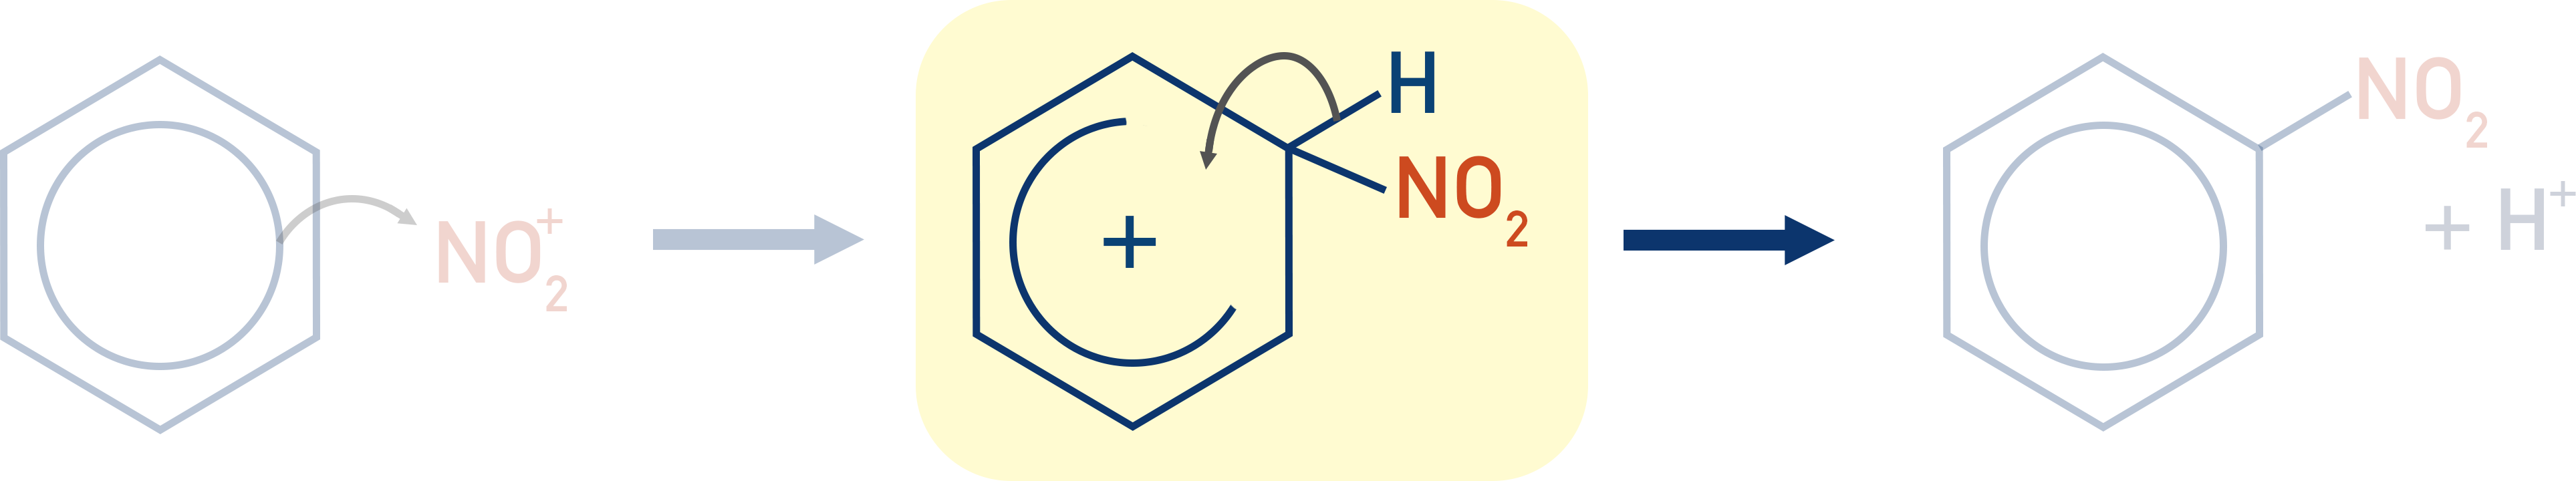 nitration of benzene mechanism second step electrophilic substitution